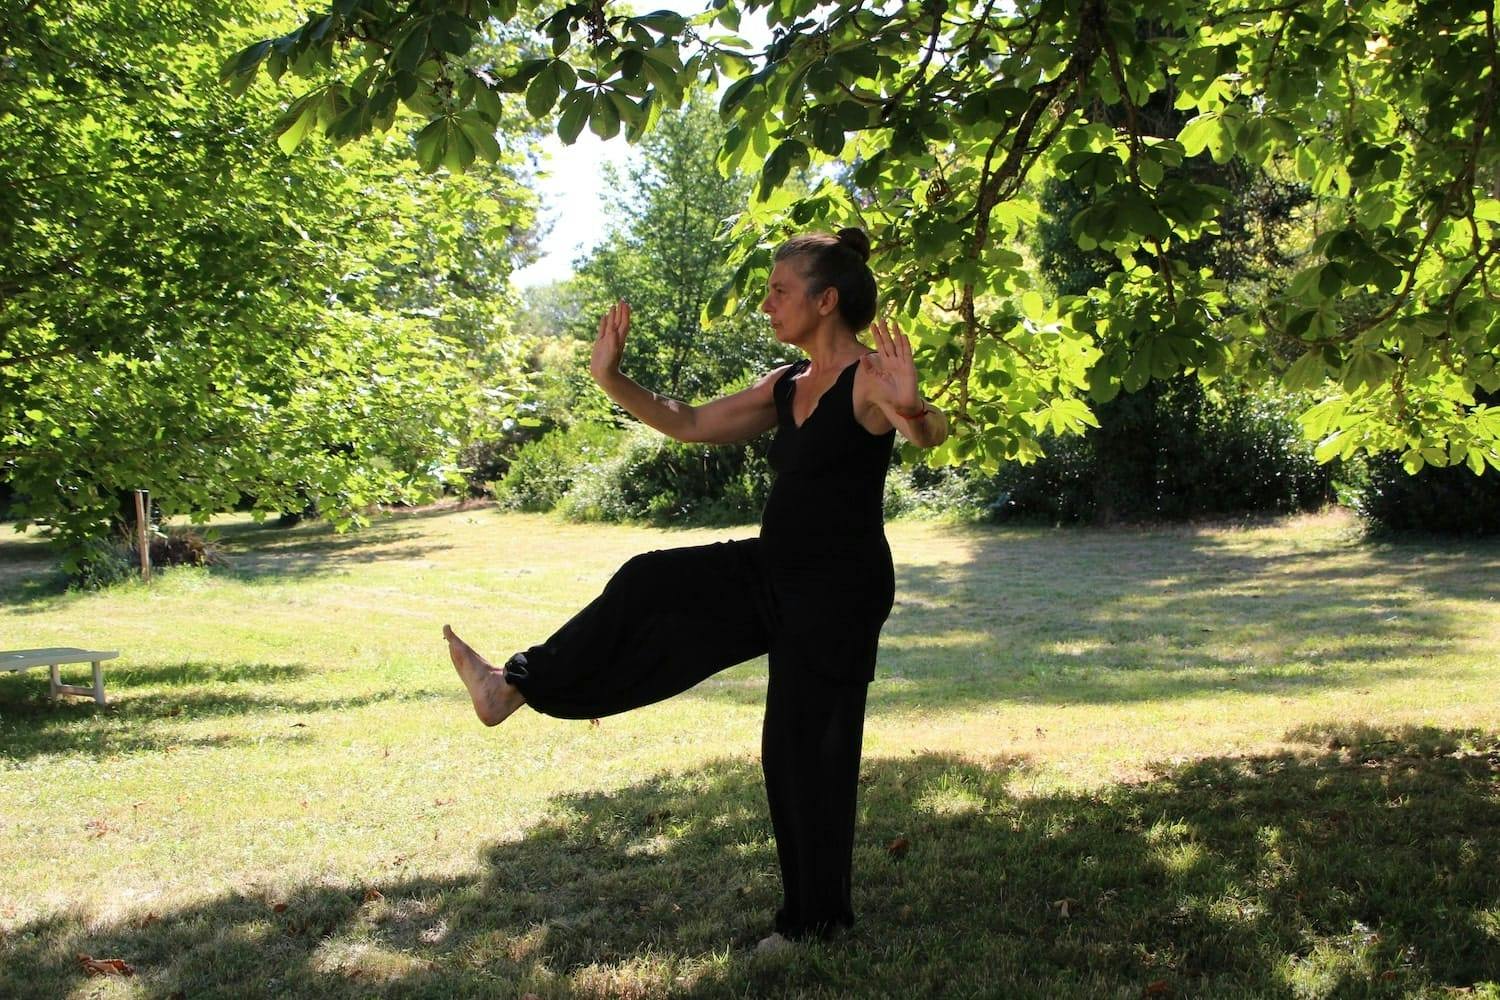 How can Tai chi help boost your wellbeing?